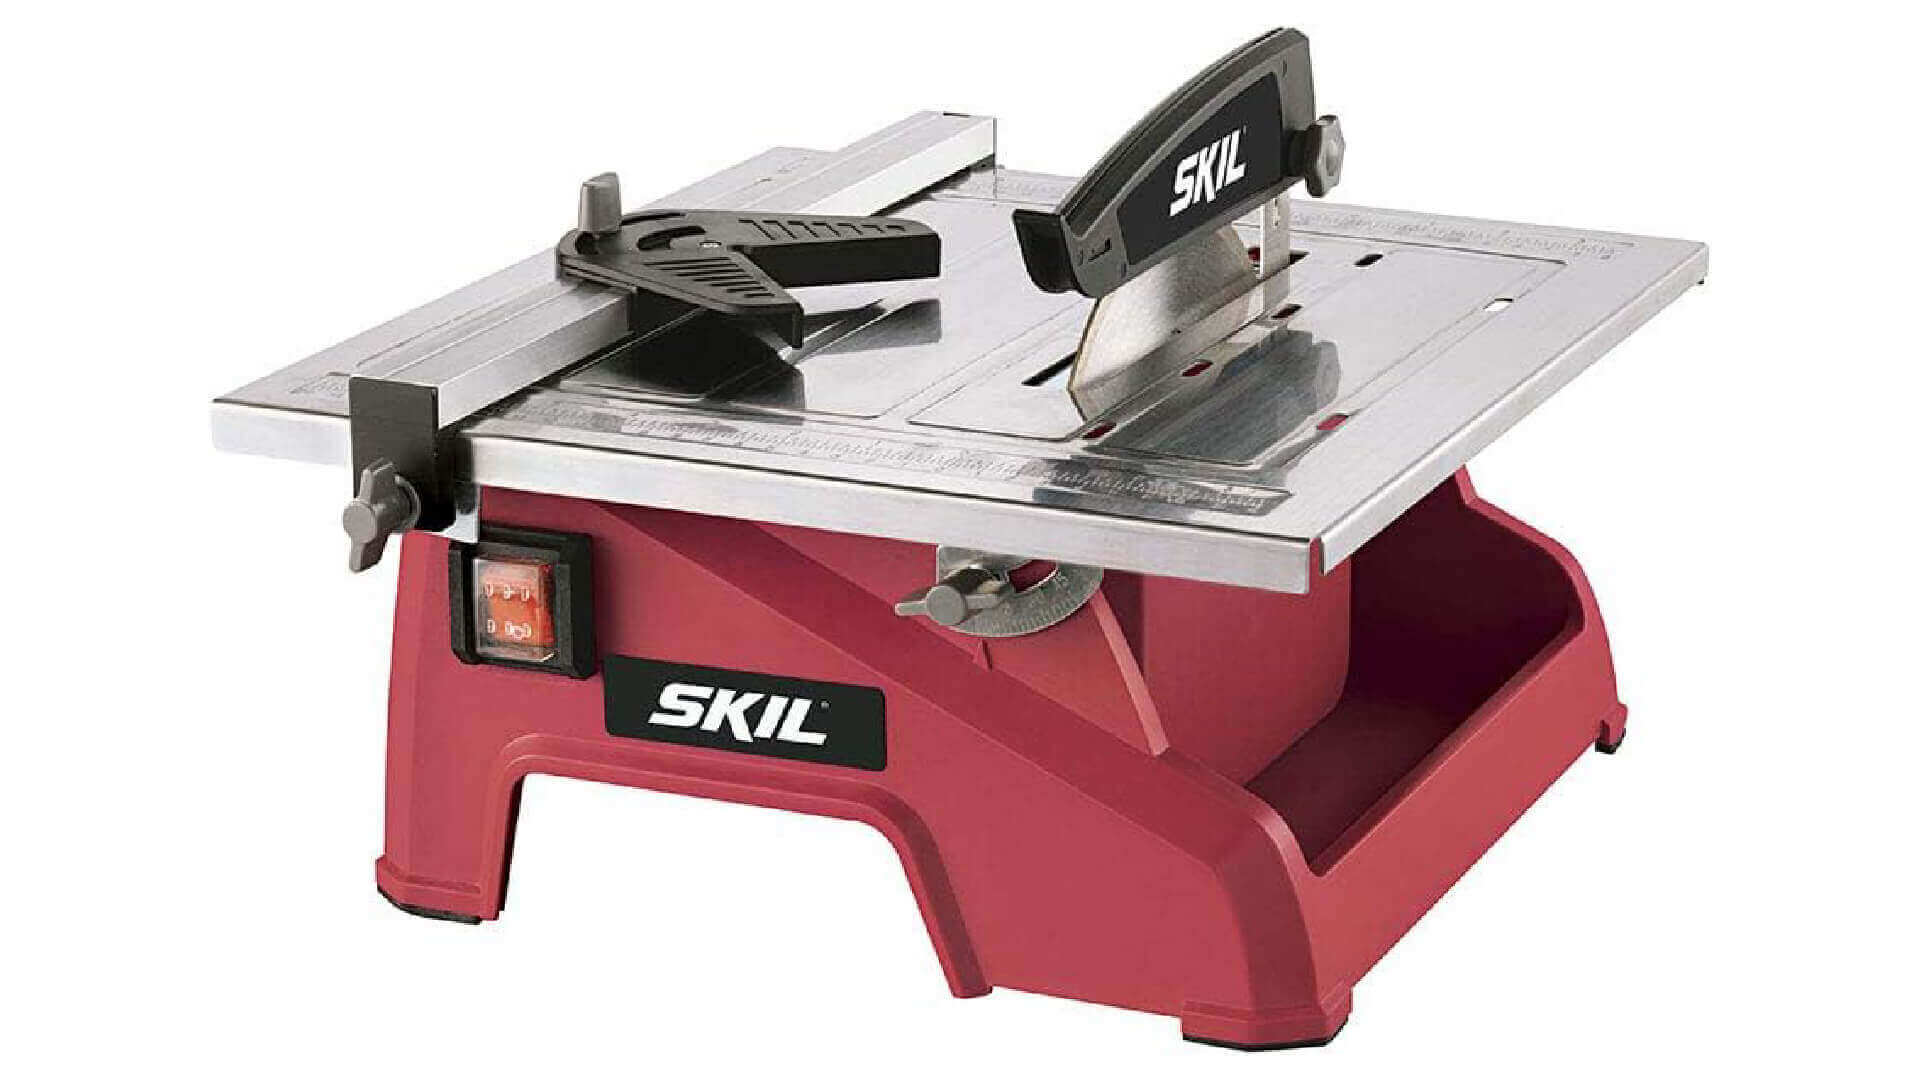 SKIL 3540-02 7-Inch Wet Tile Saw Review